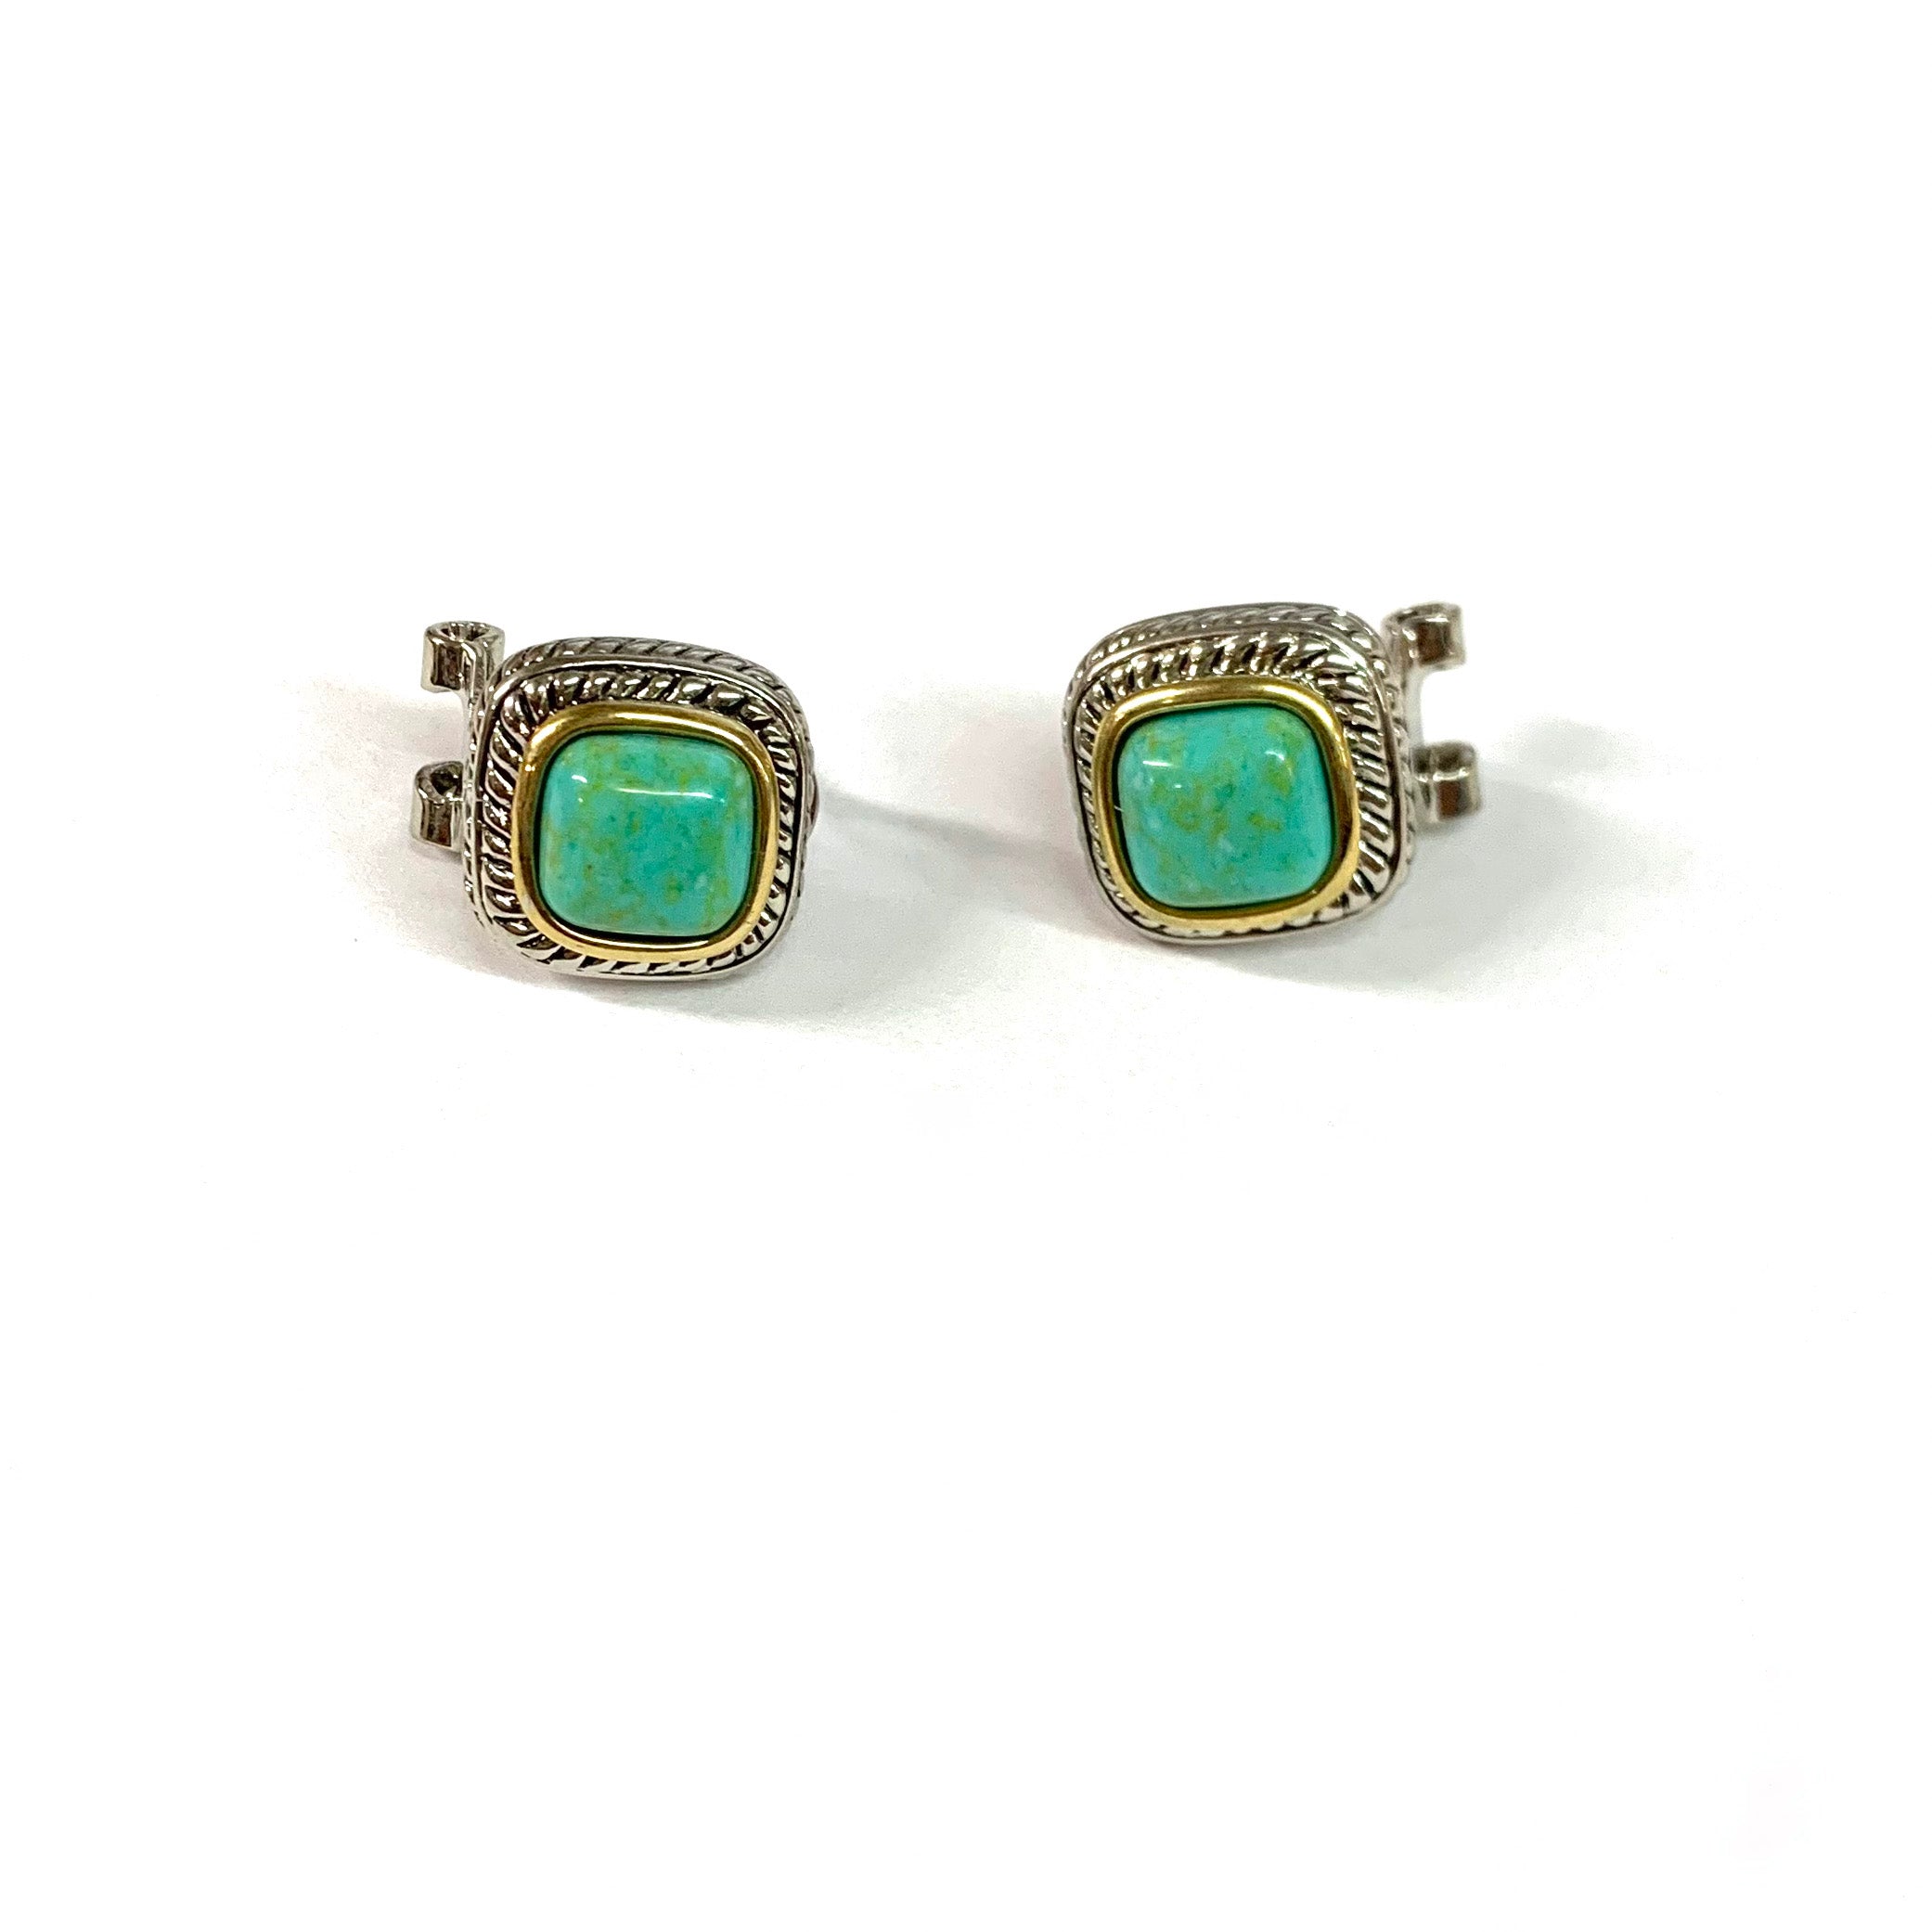 Two Toned Square Shaped Earrings in Turquoise - Giddy Up Glamour Boutique